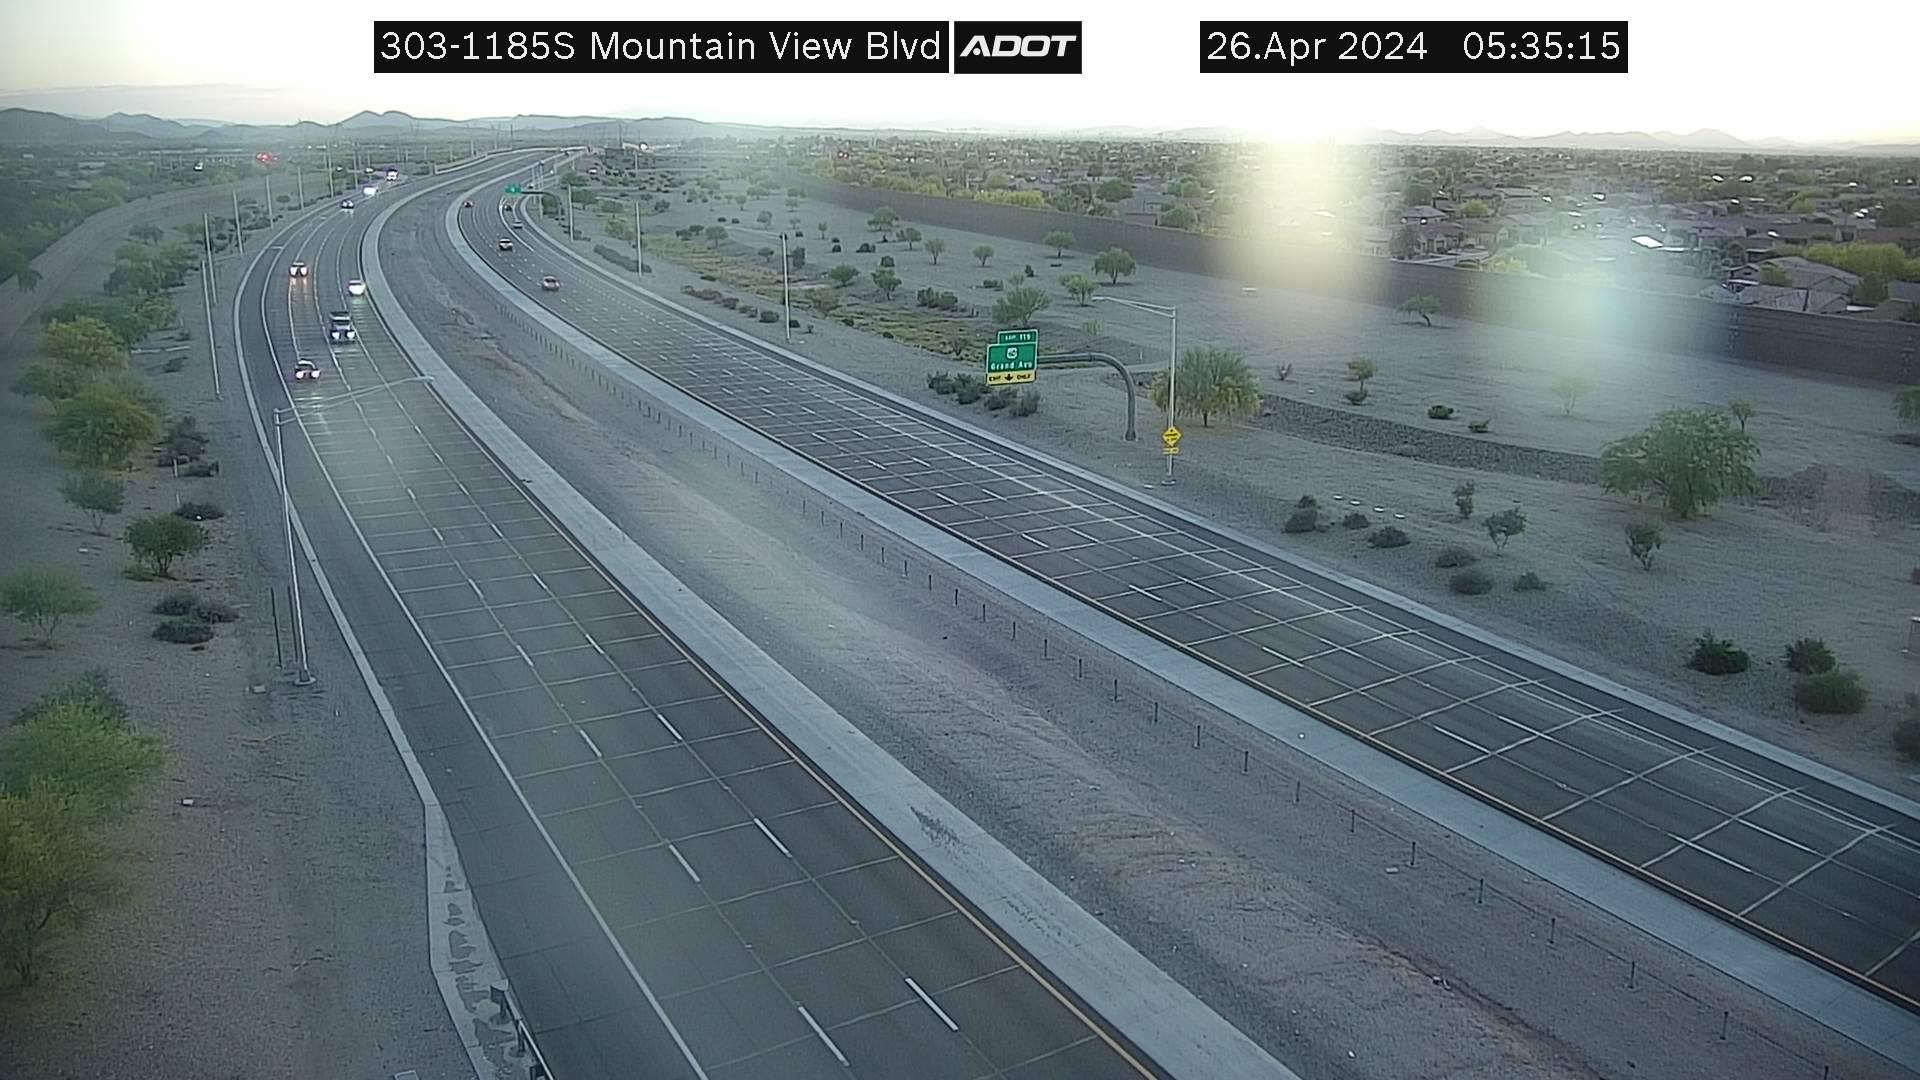 Traffic Cam Surprise › South: L-303 SB 118.55 @MOUNTAIN VIEW Player